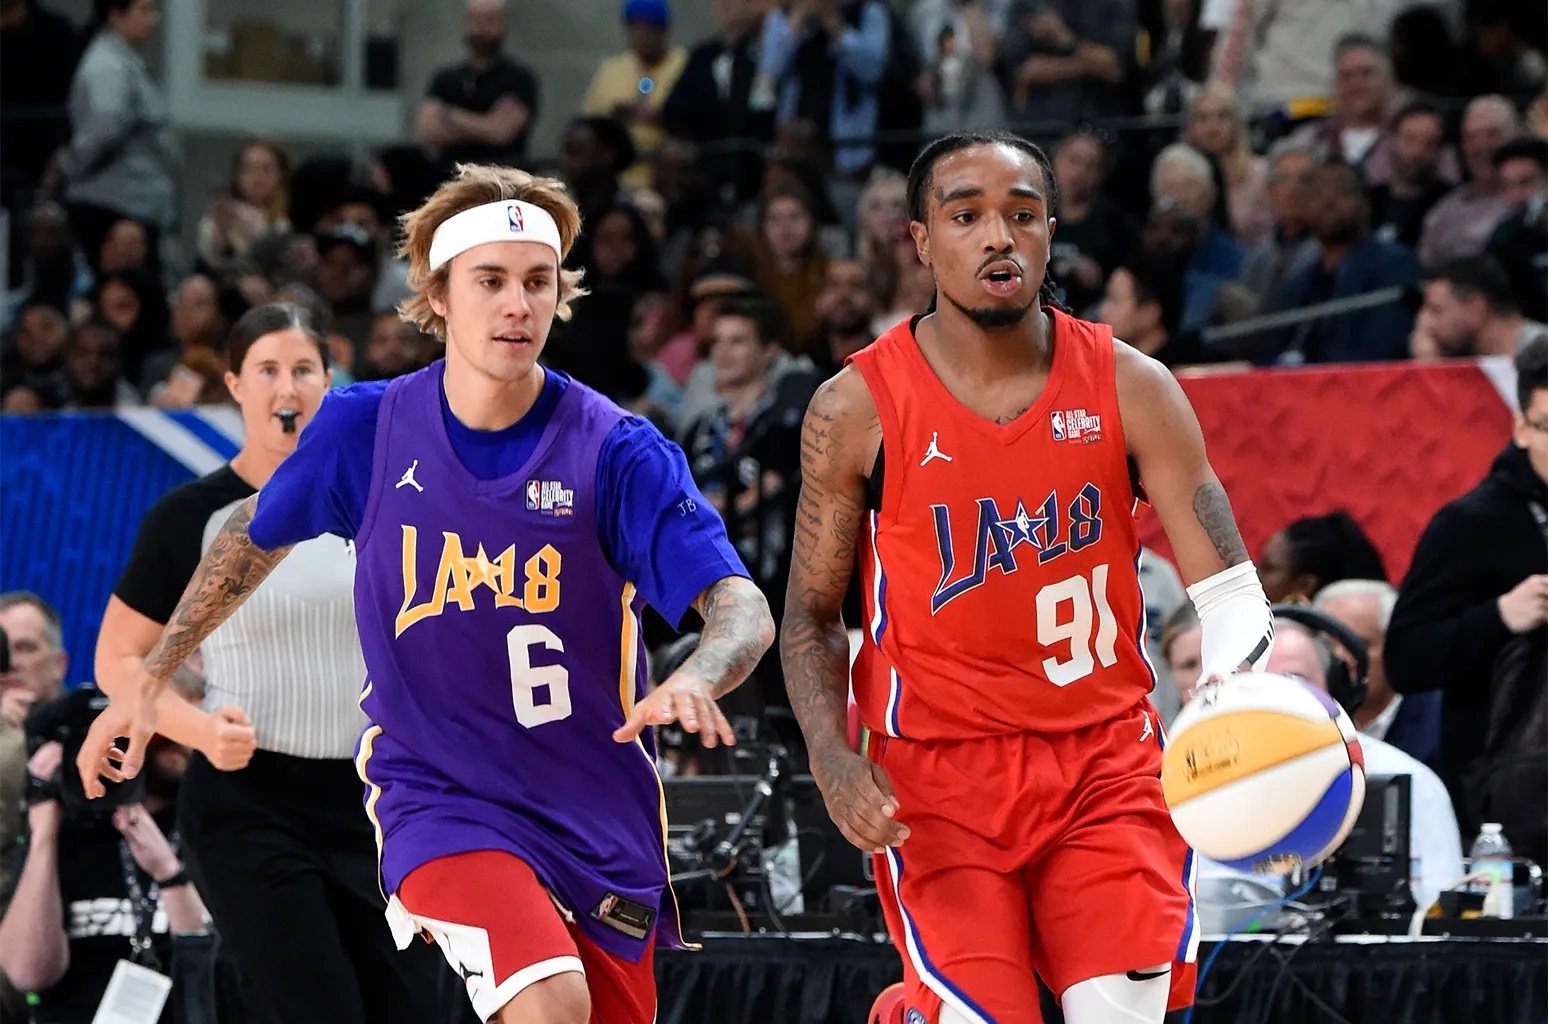 Justin Bieber Impresses With Basketball Skills In L.A. Game